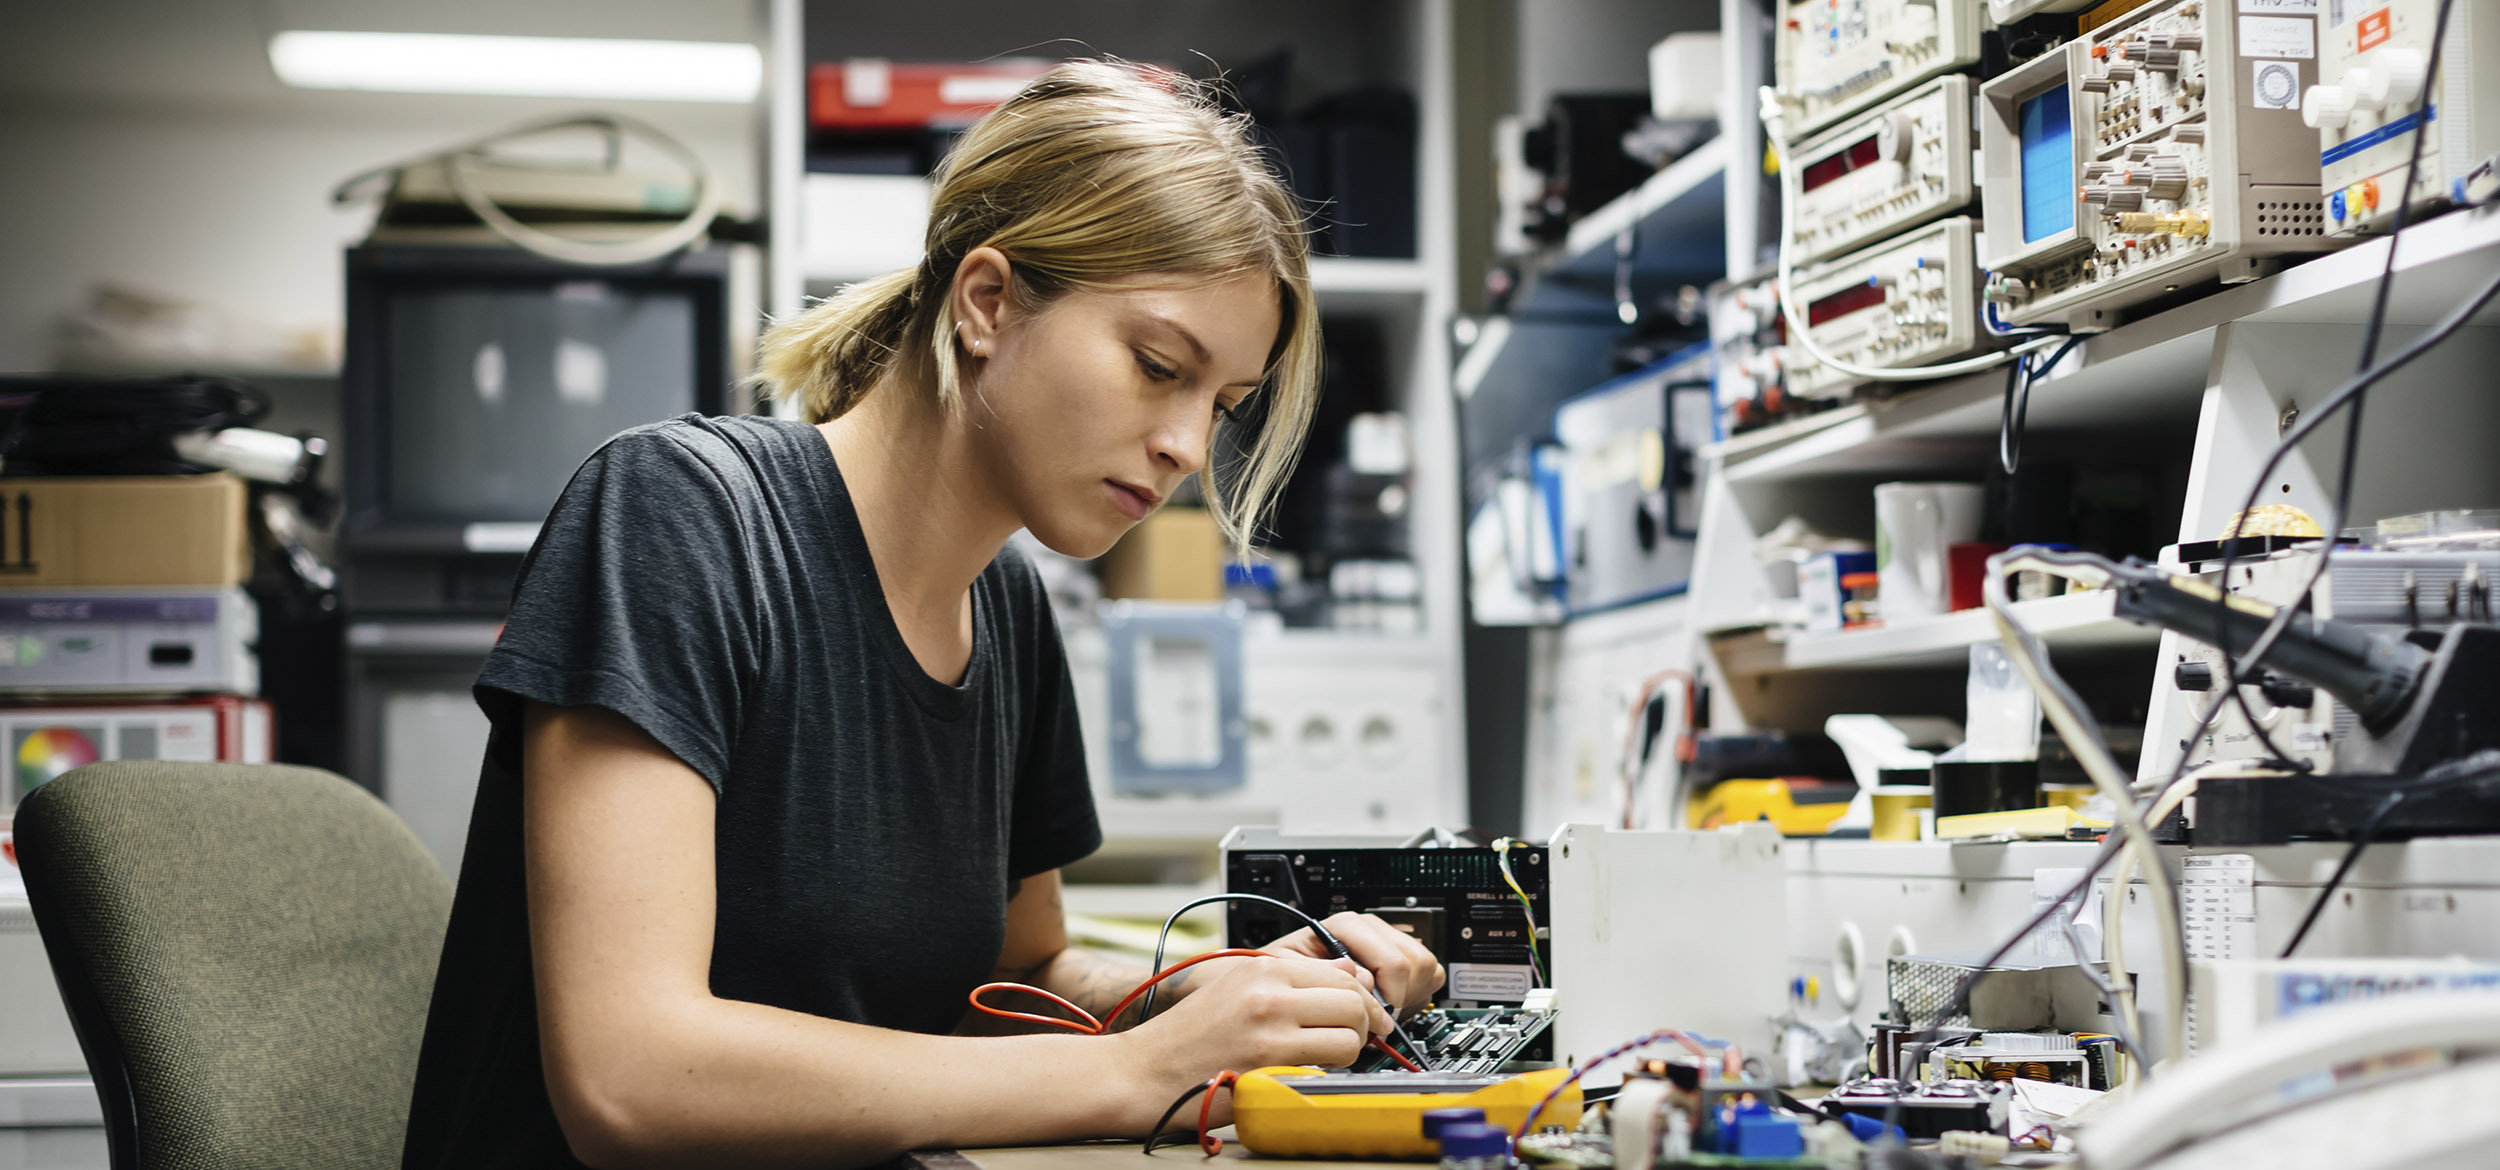 Student measures voltage on a conductor board in a workshop in Berlin, Germany. 